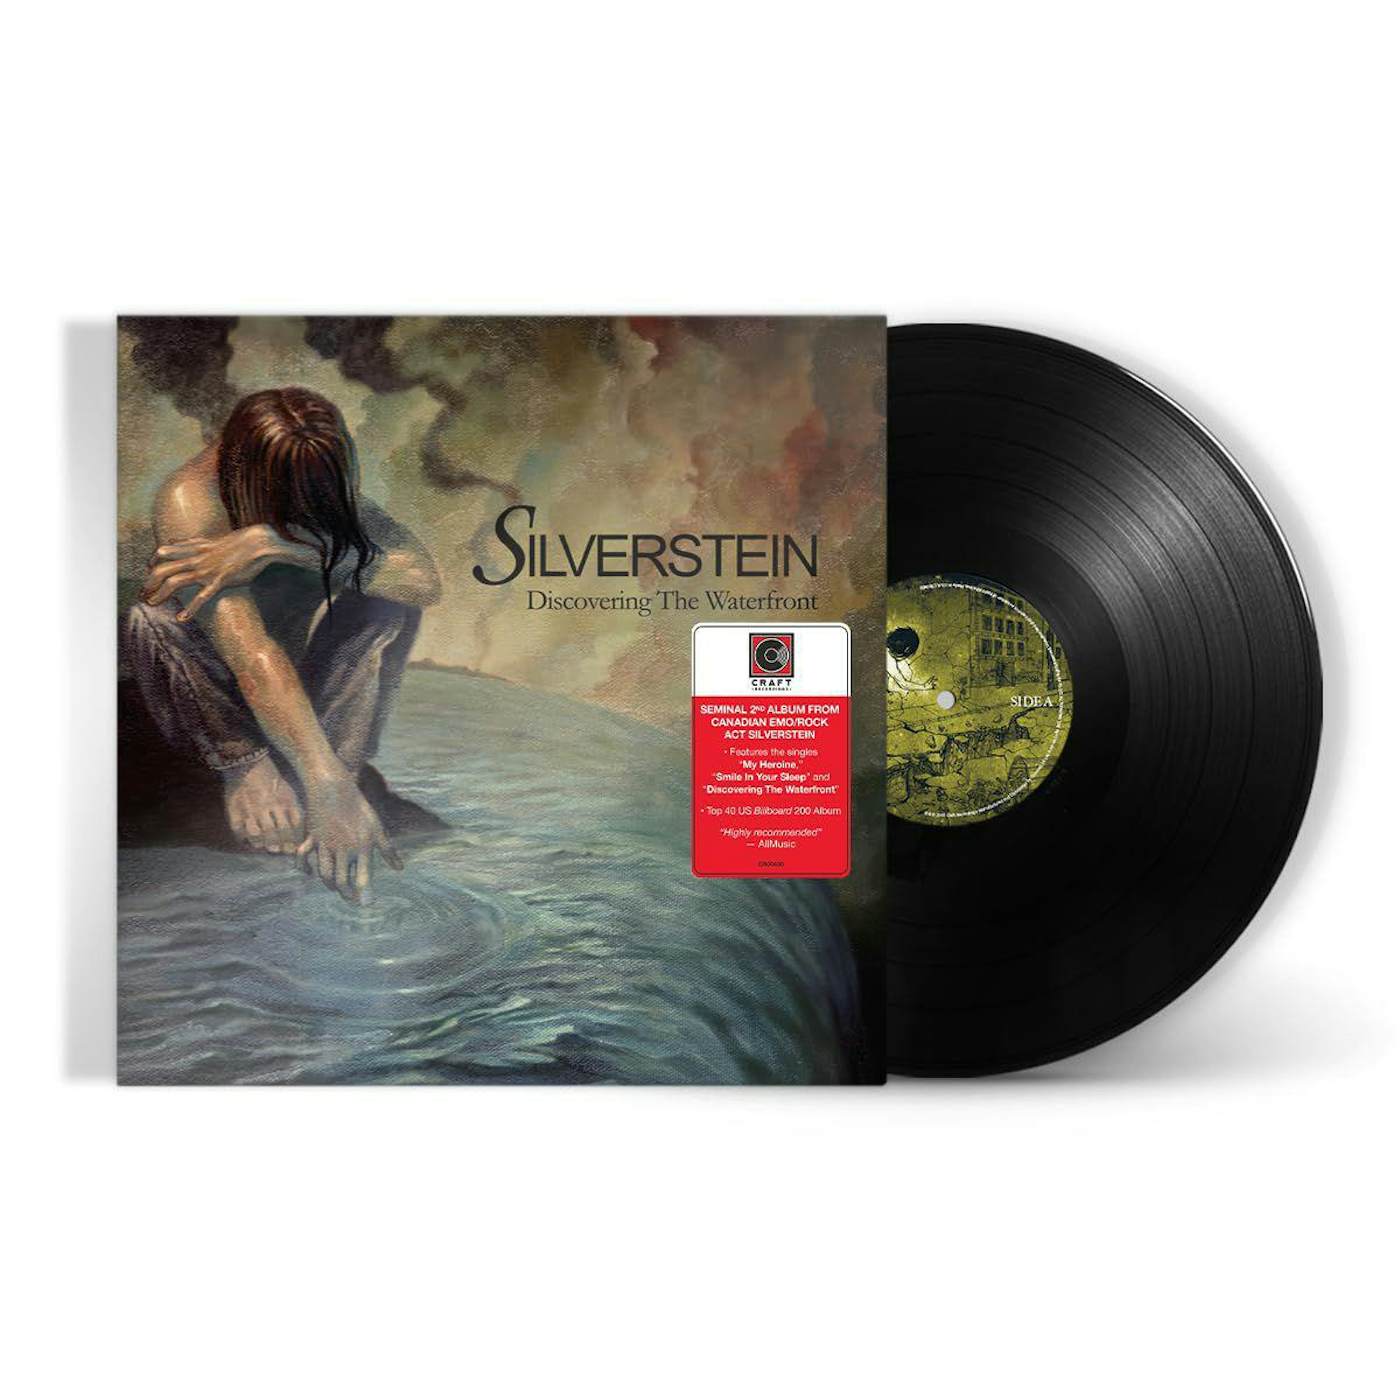 Silverstein Discovering The Waterfront Vinyl Record